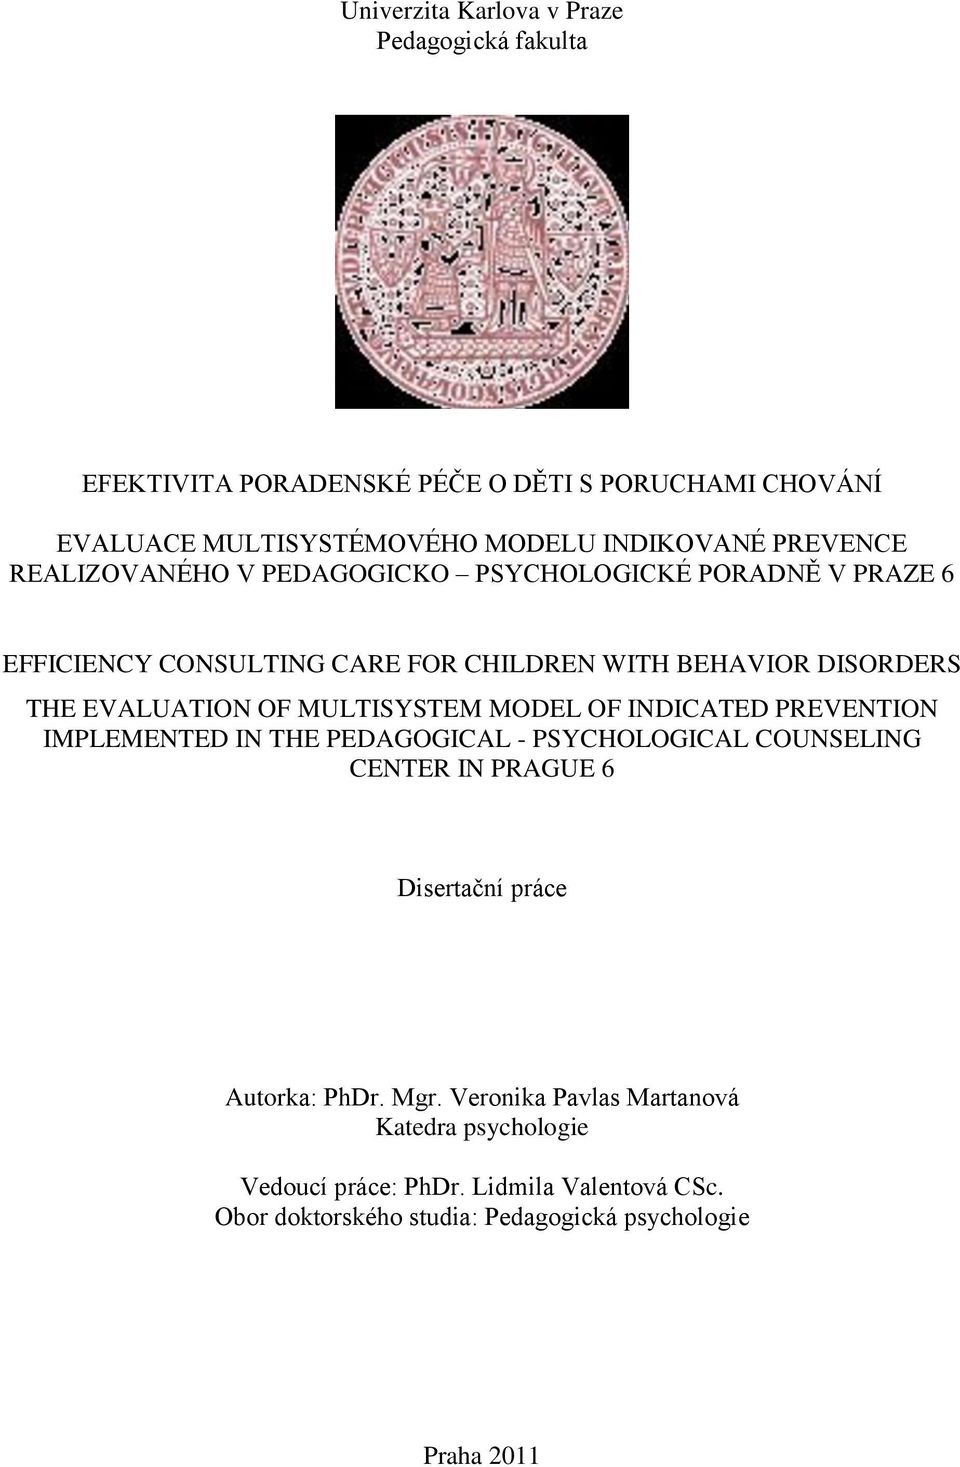 MULTISYSTEM MODEL OF INDICATED PREVENTION IMPLEMENTED IN THE PEDAGOGICAL - PSYCHOLOGICAL COUNSELING CENTER IN PRAGUE 6 Disertační práce Autorka: PhDr.